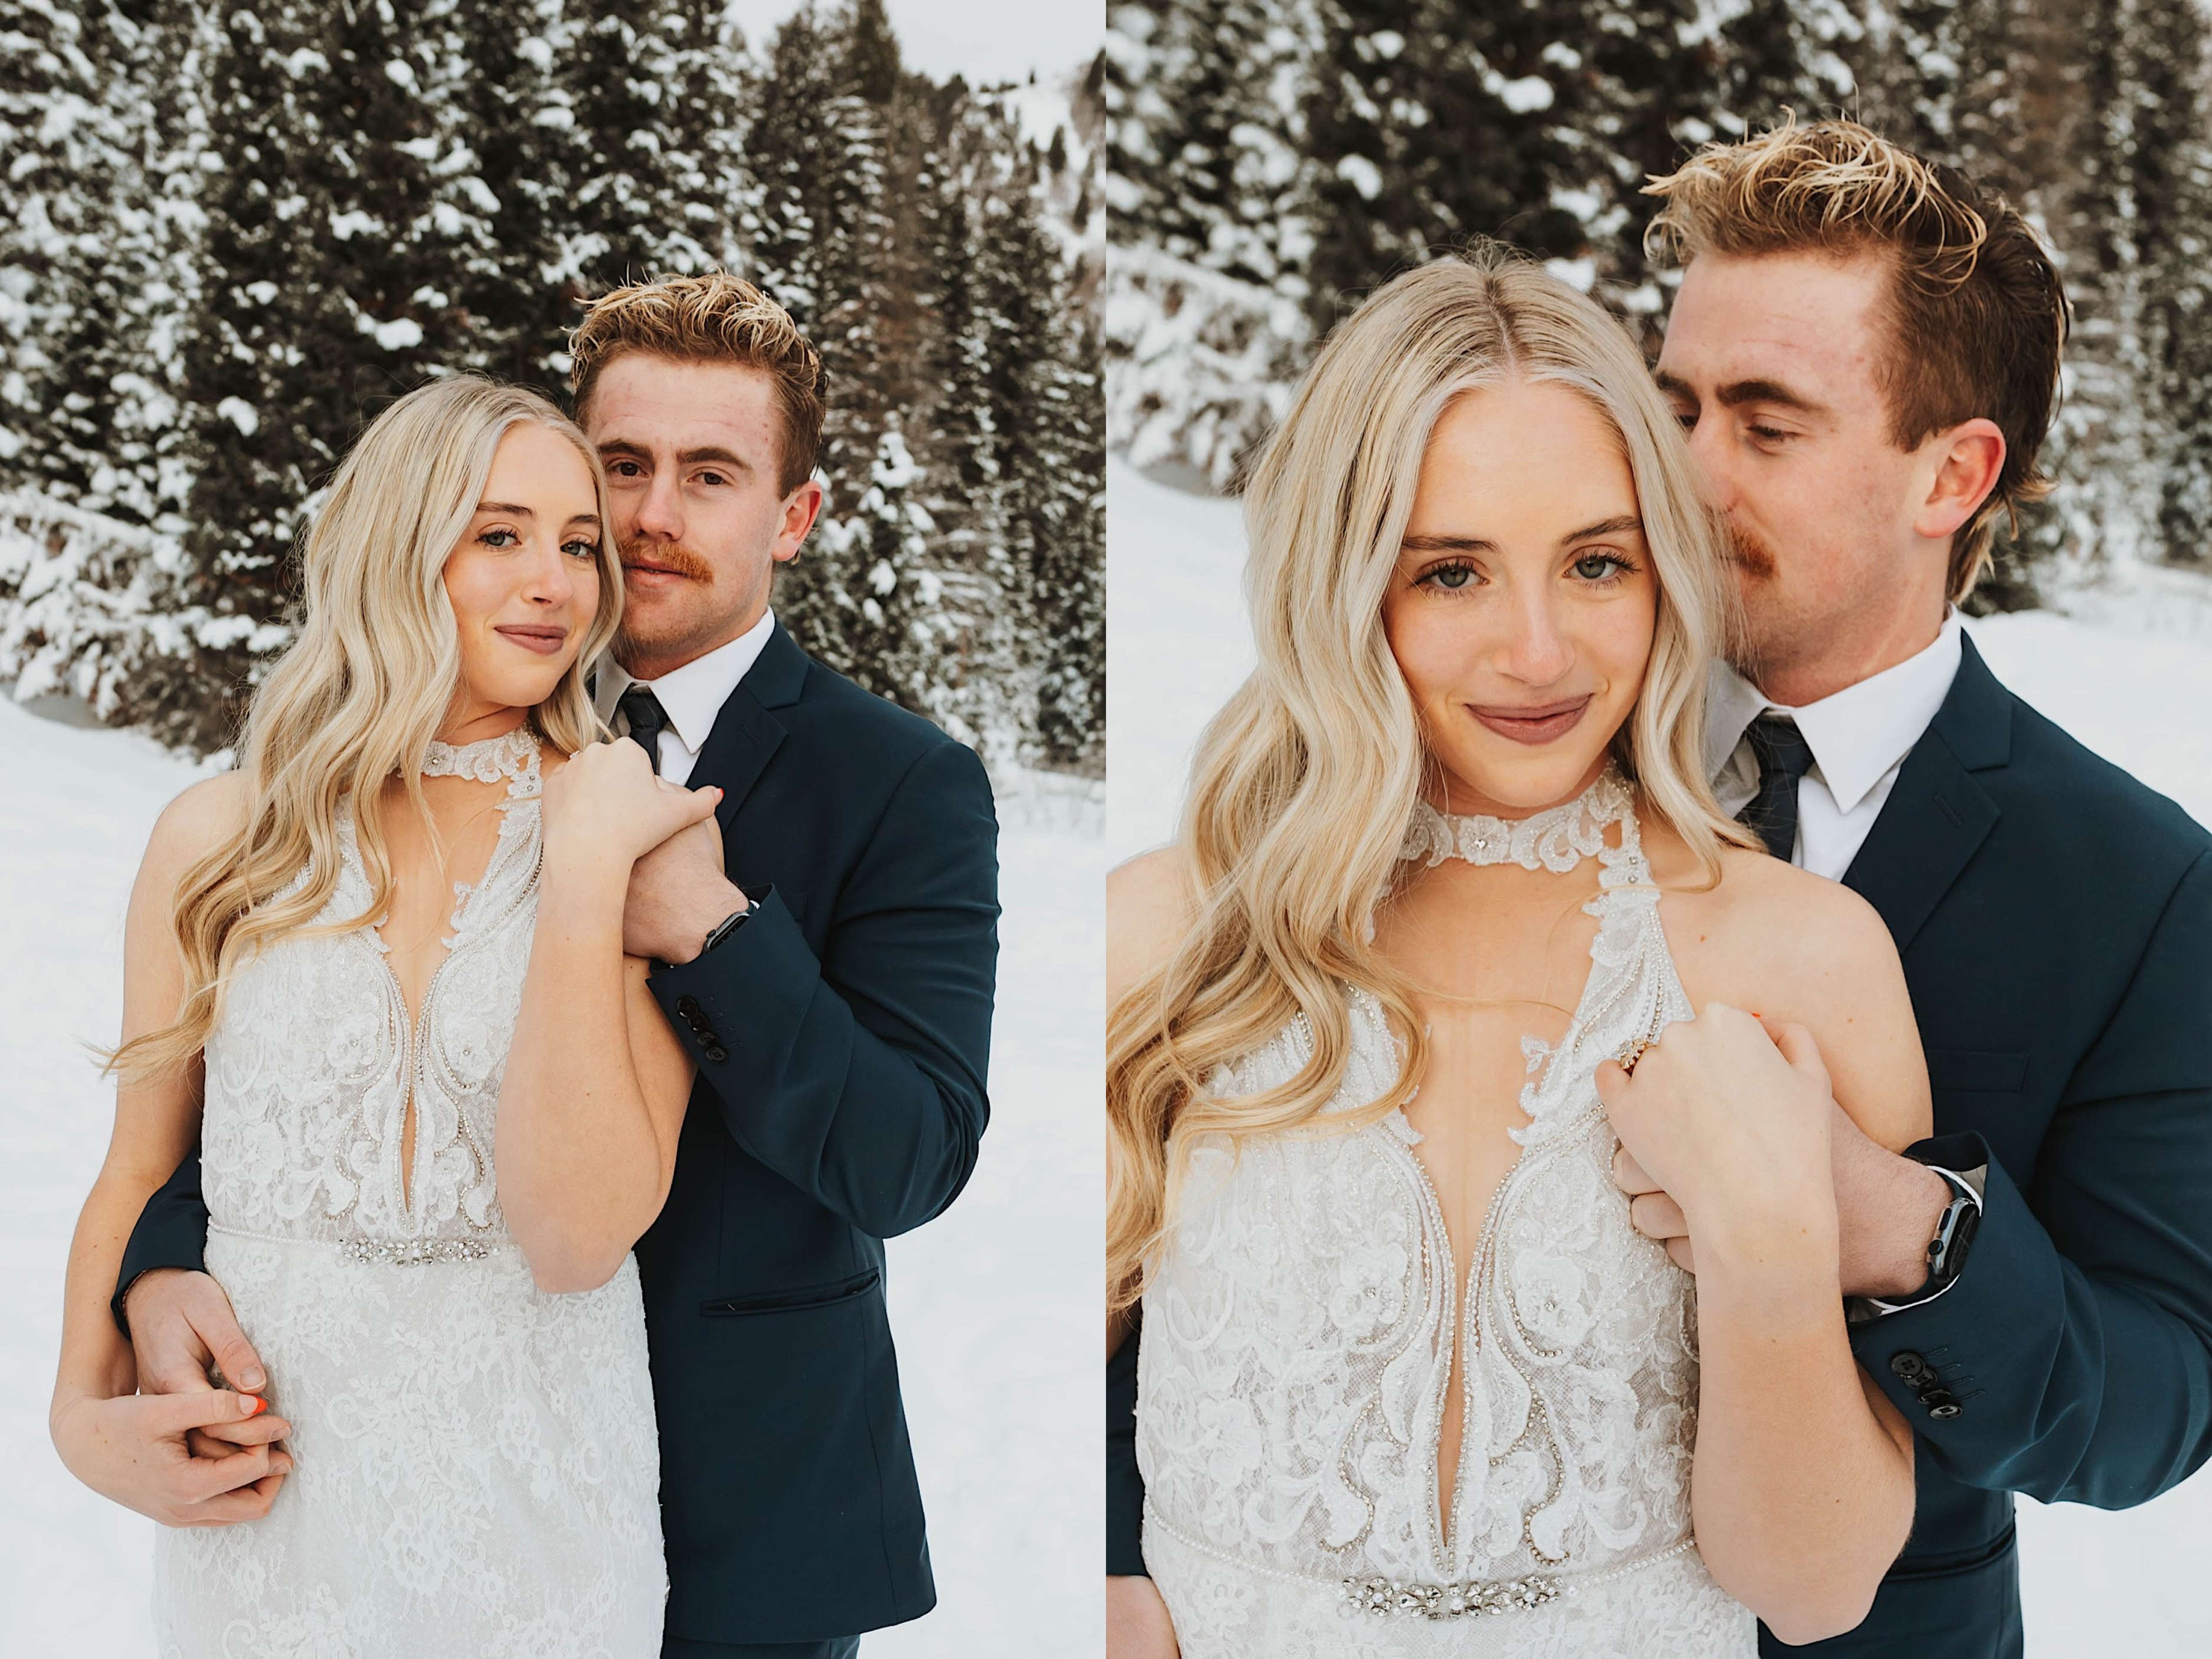 2 photos side by side of a bride and groom in a snow covered forest, the bride is standing in front of the groom, in the left photo they are both looking at the camera, in the right the bride is looking at the camera while the groom looks at her